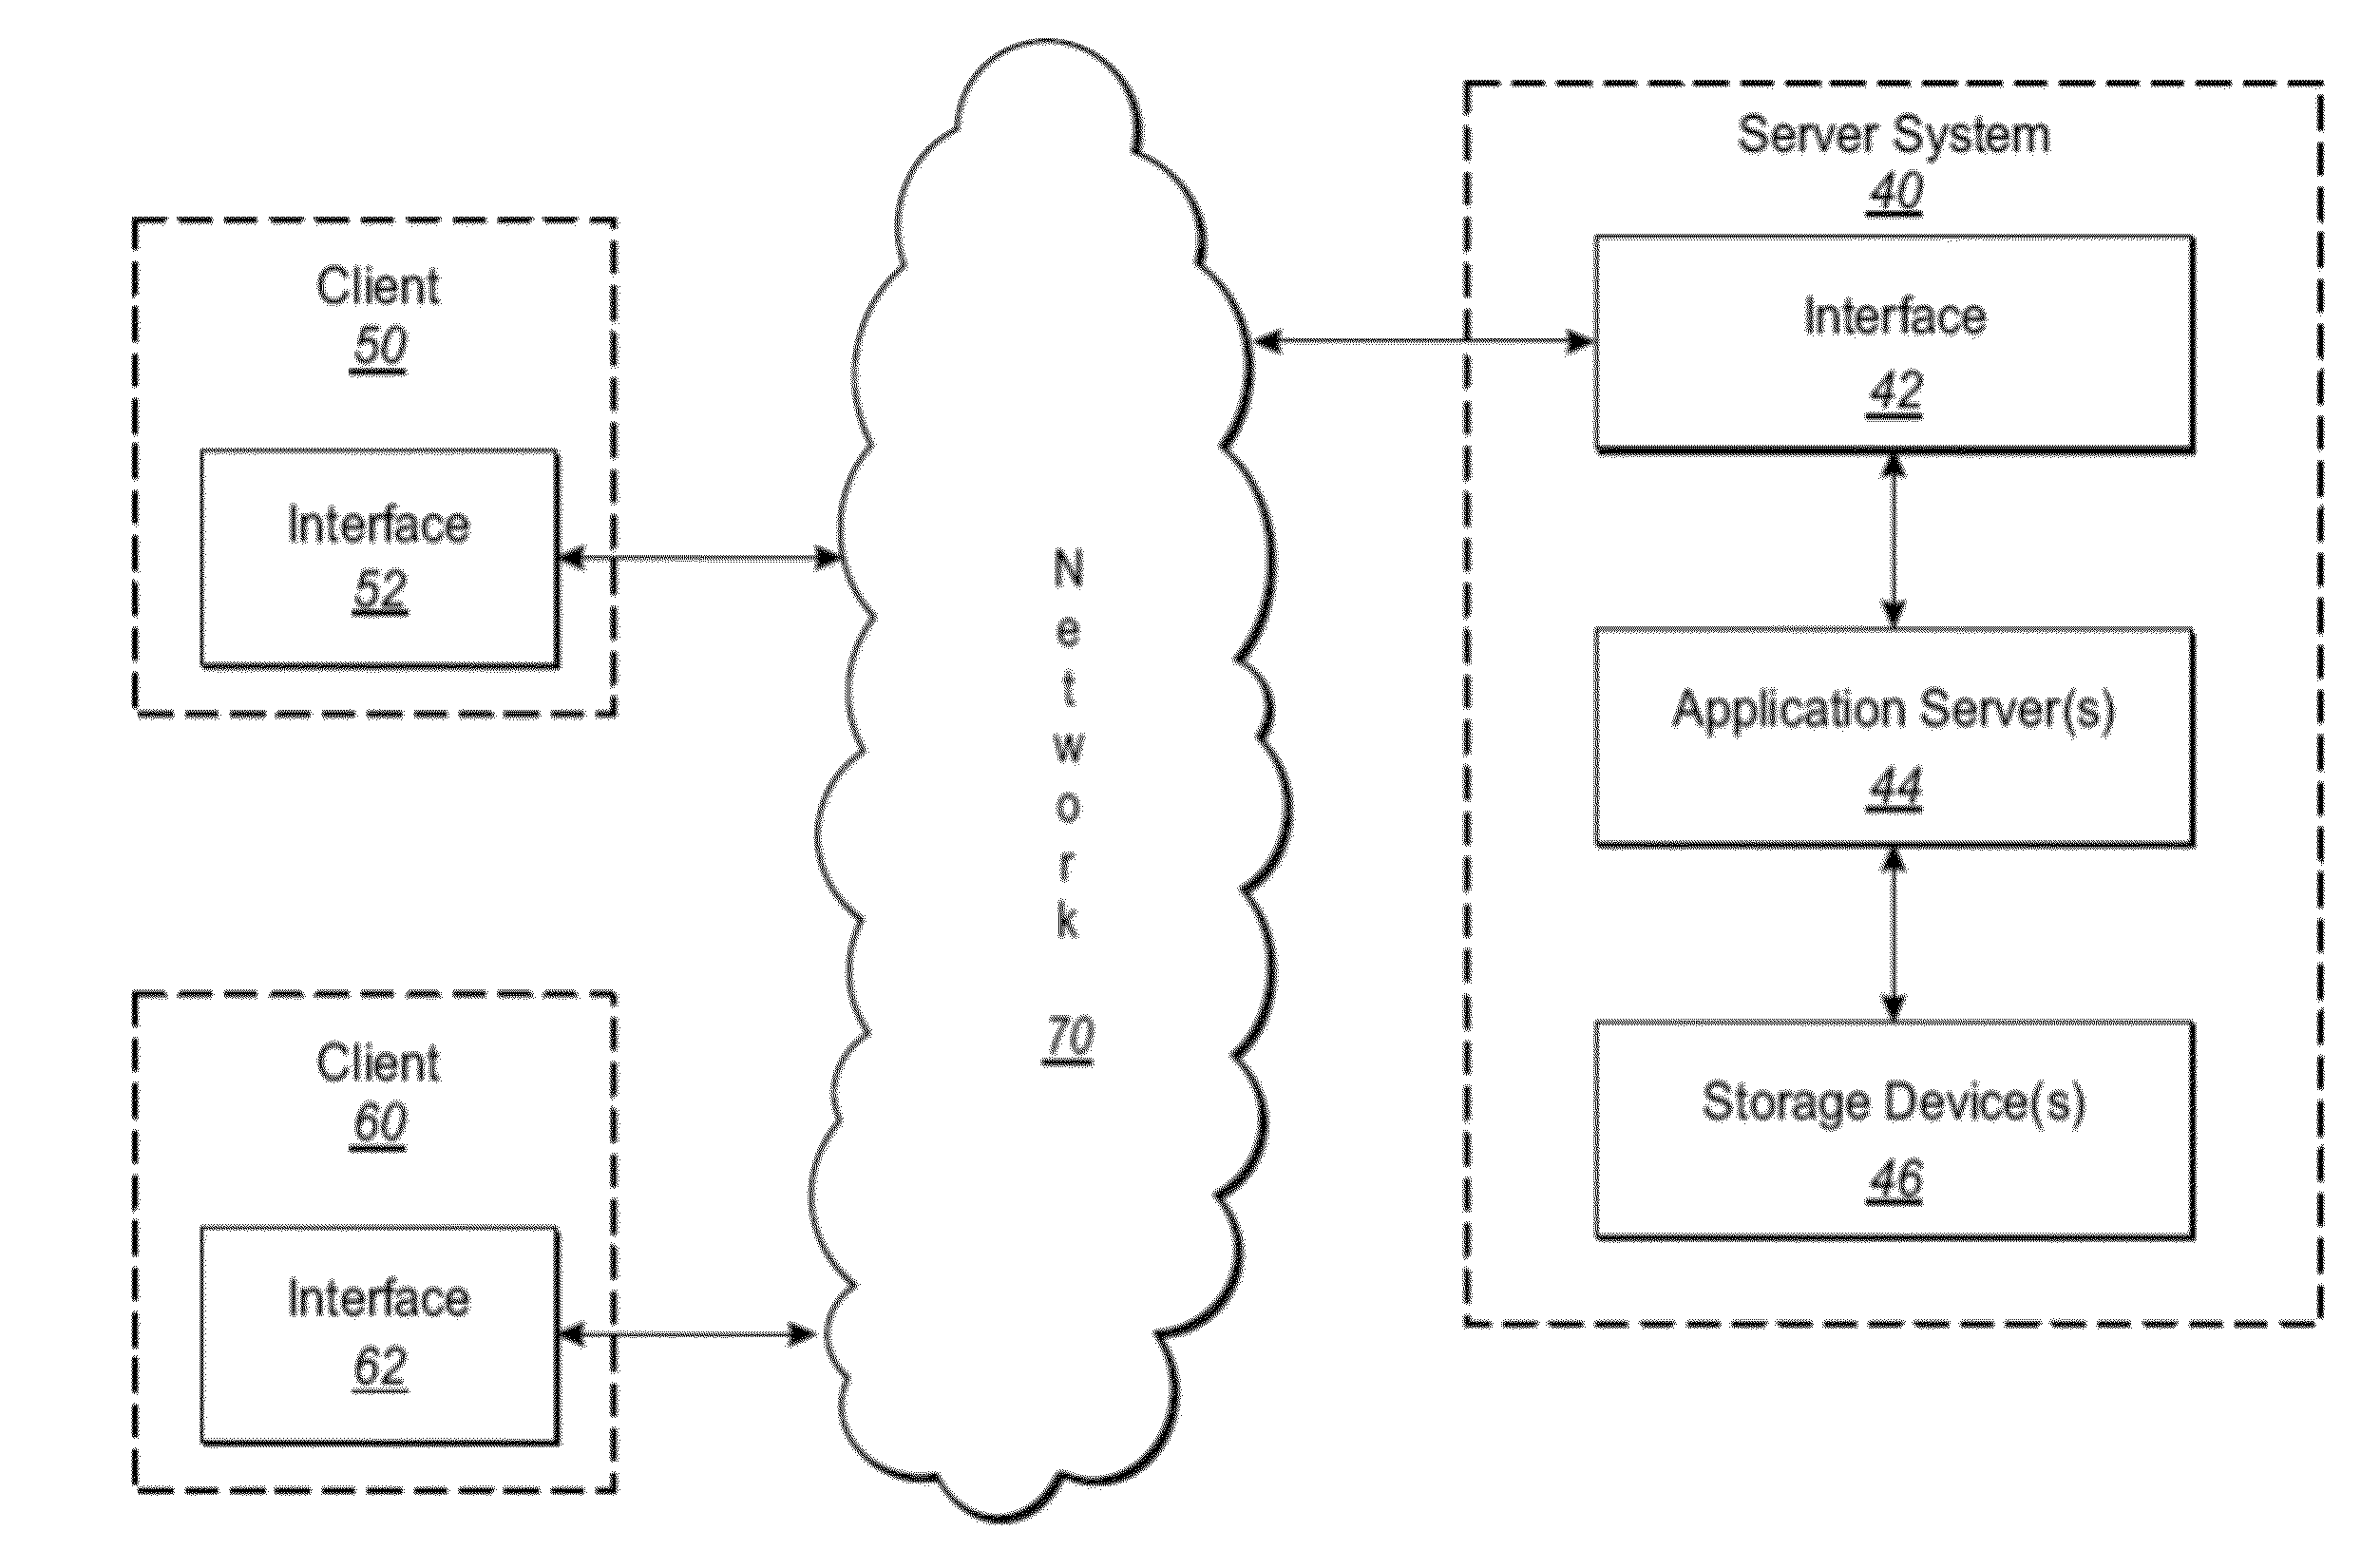 Dynamically integrating disparate computer-aided dispatch systems